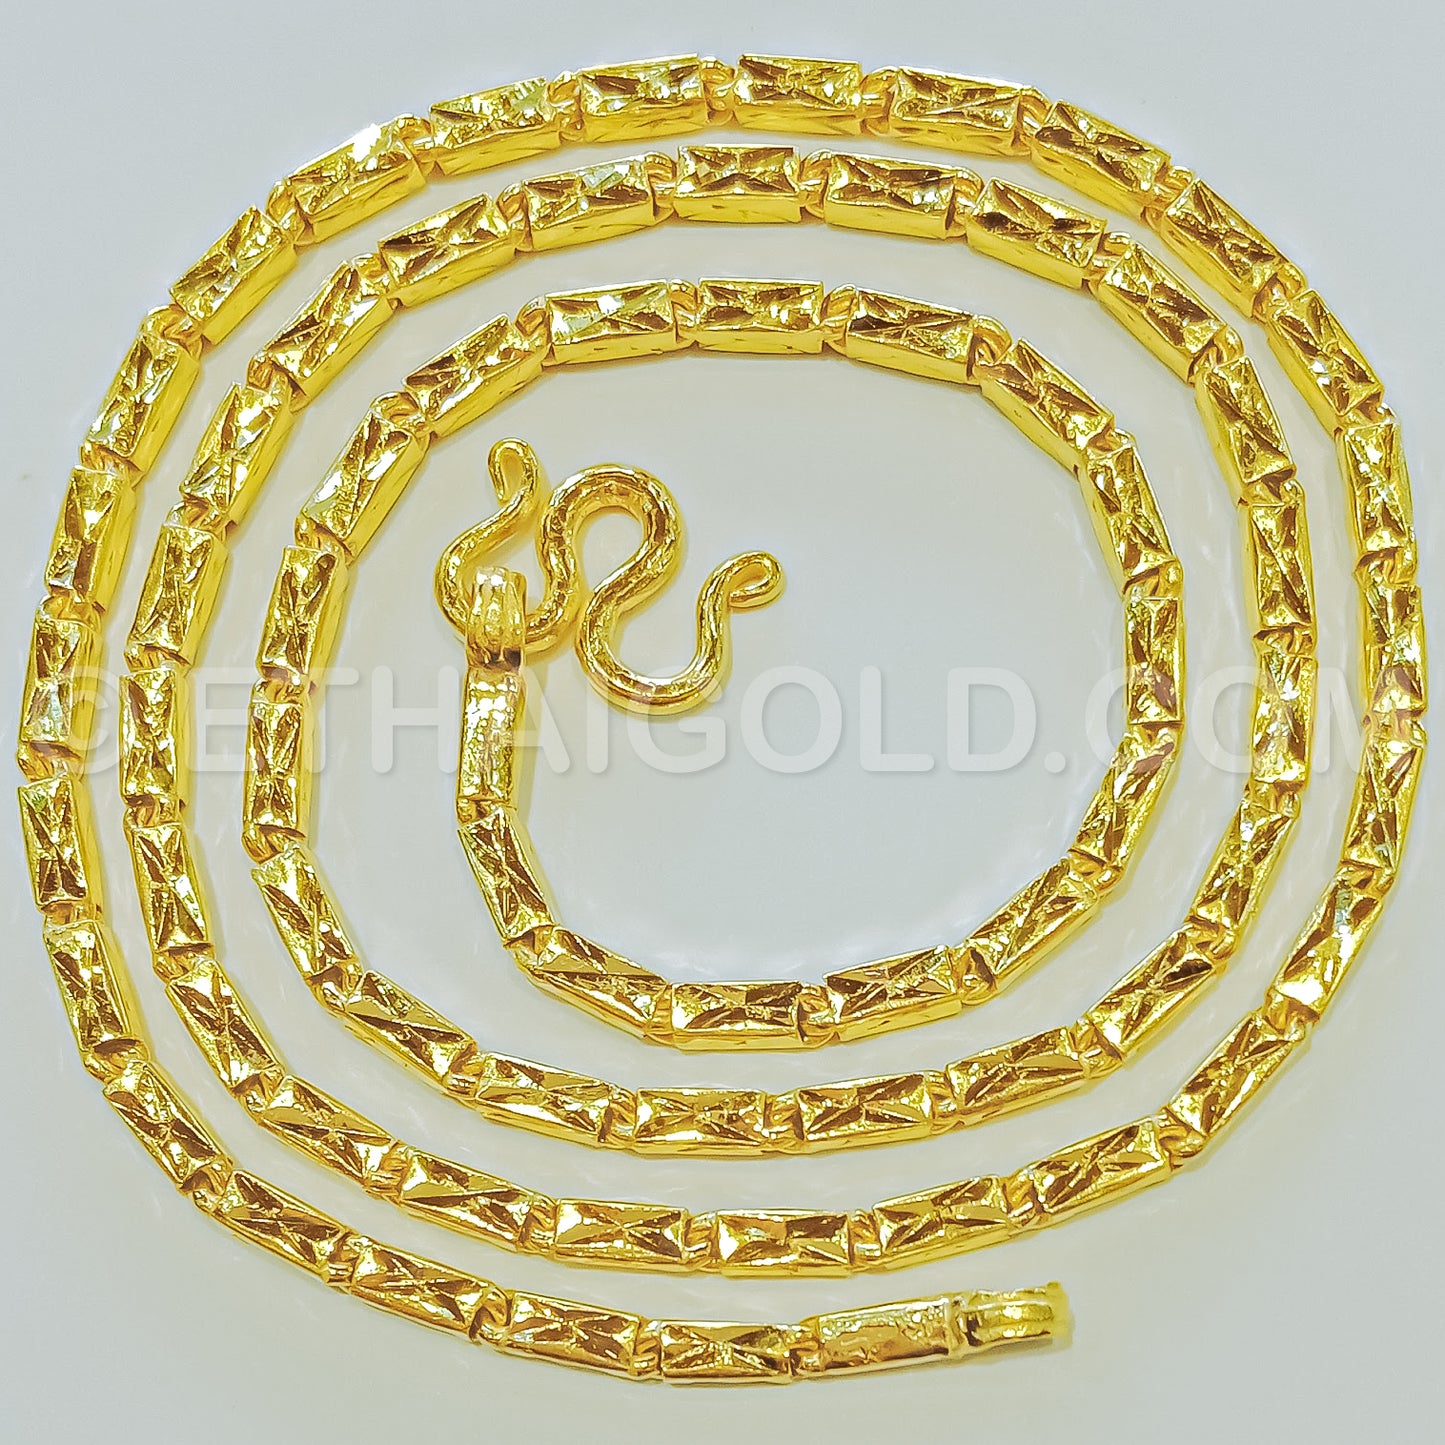 3 BAHT POLISHED SINGLE-X-DIAMOND-CUT SOLID SQUARE BARREL CHAIN NECKLACE IN 23K GOLD (ID: N2103B)